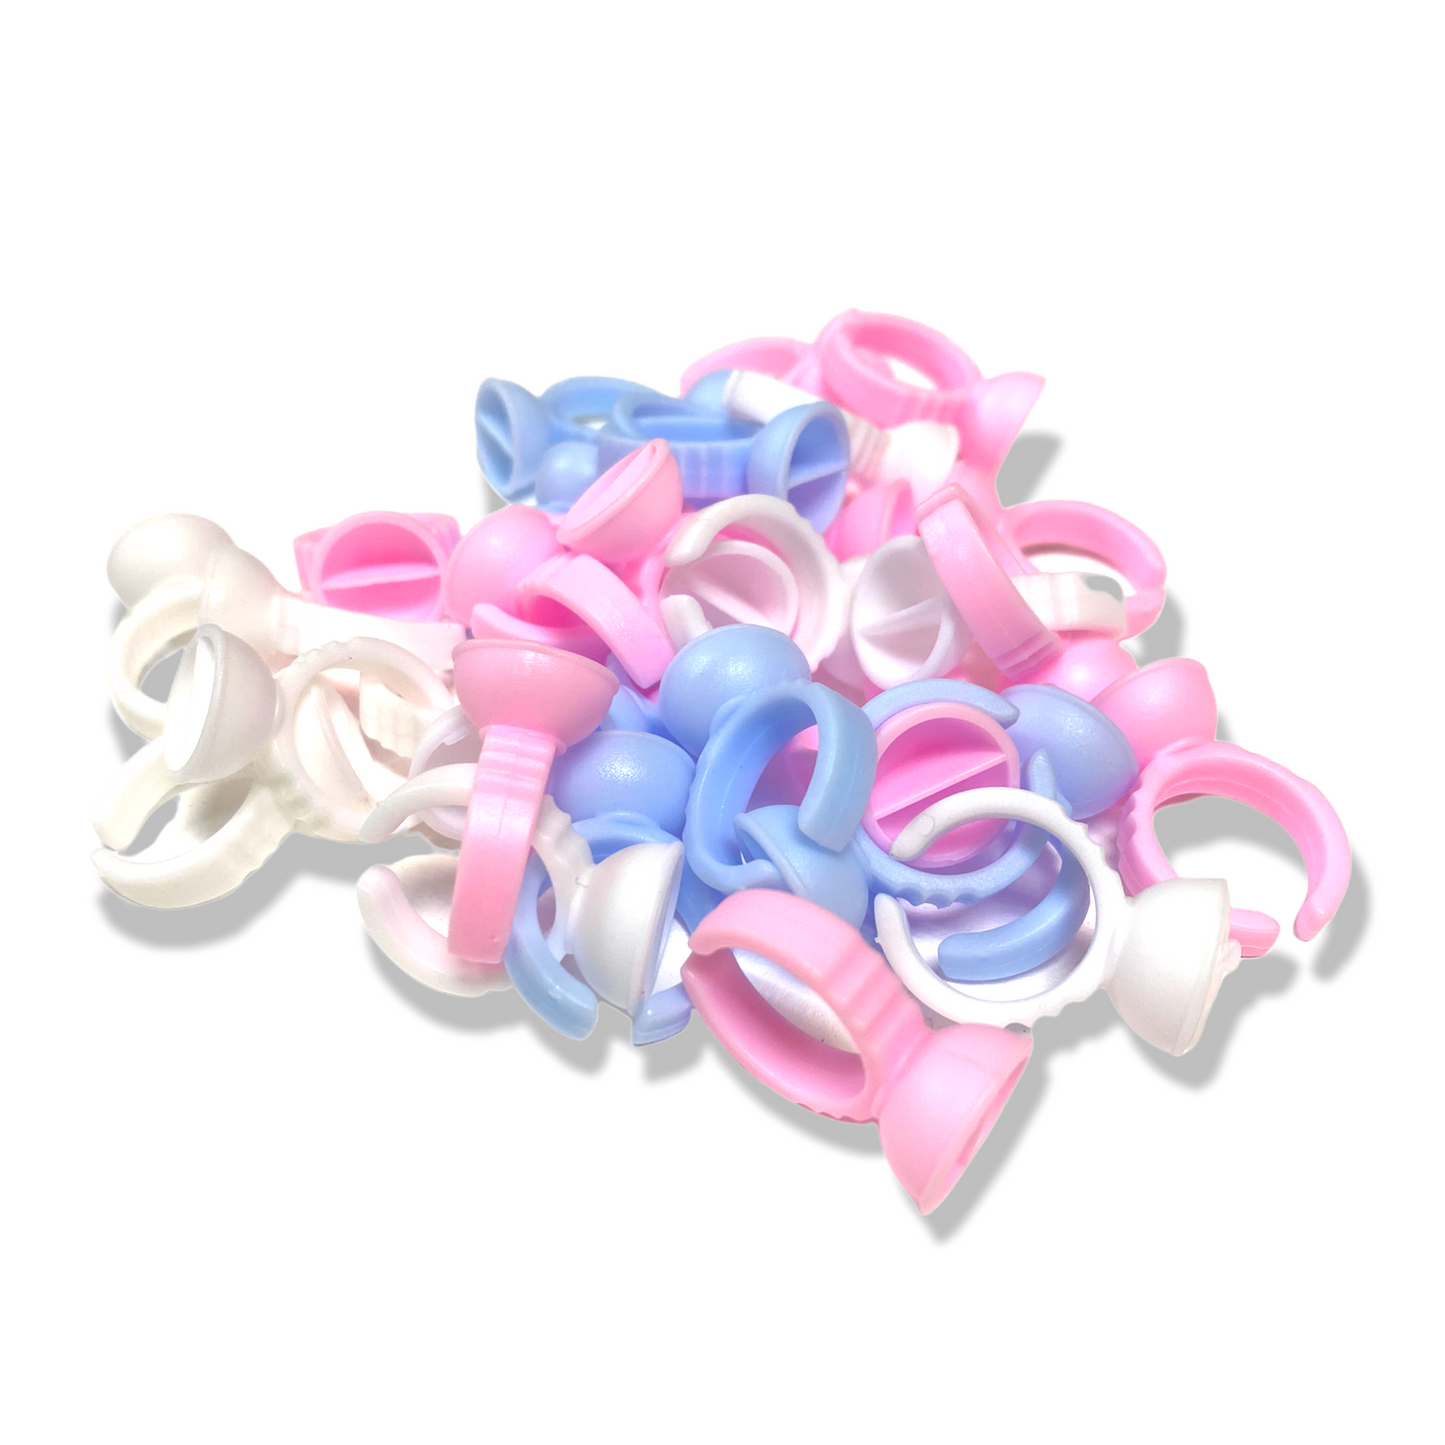 Regular Mixed Color Disposable Glue Rings  with divider (50 pcs)